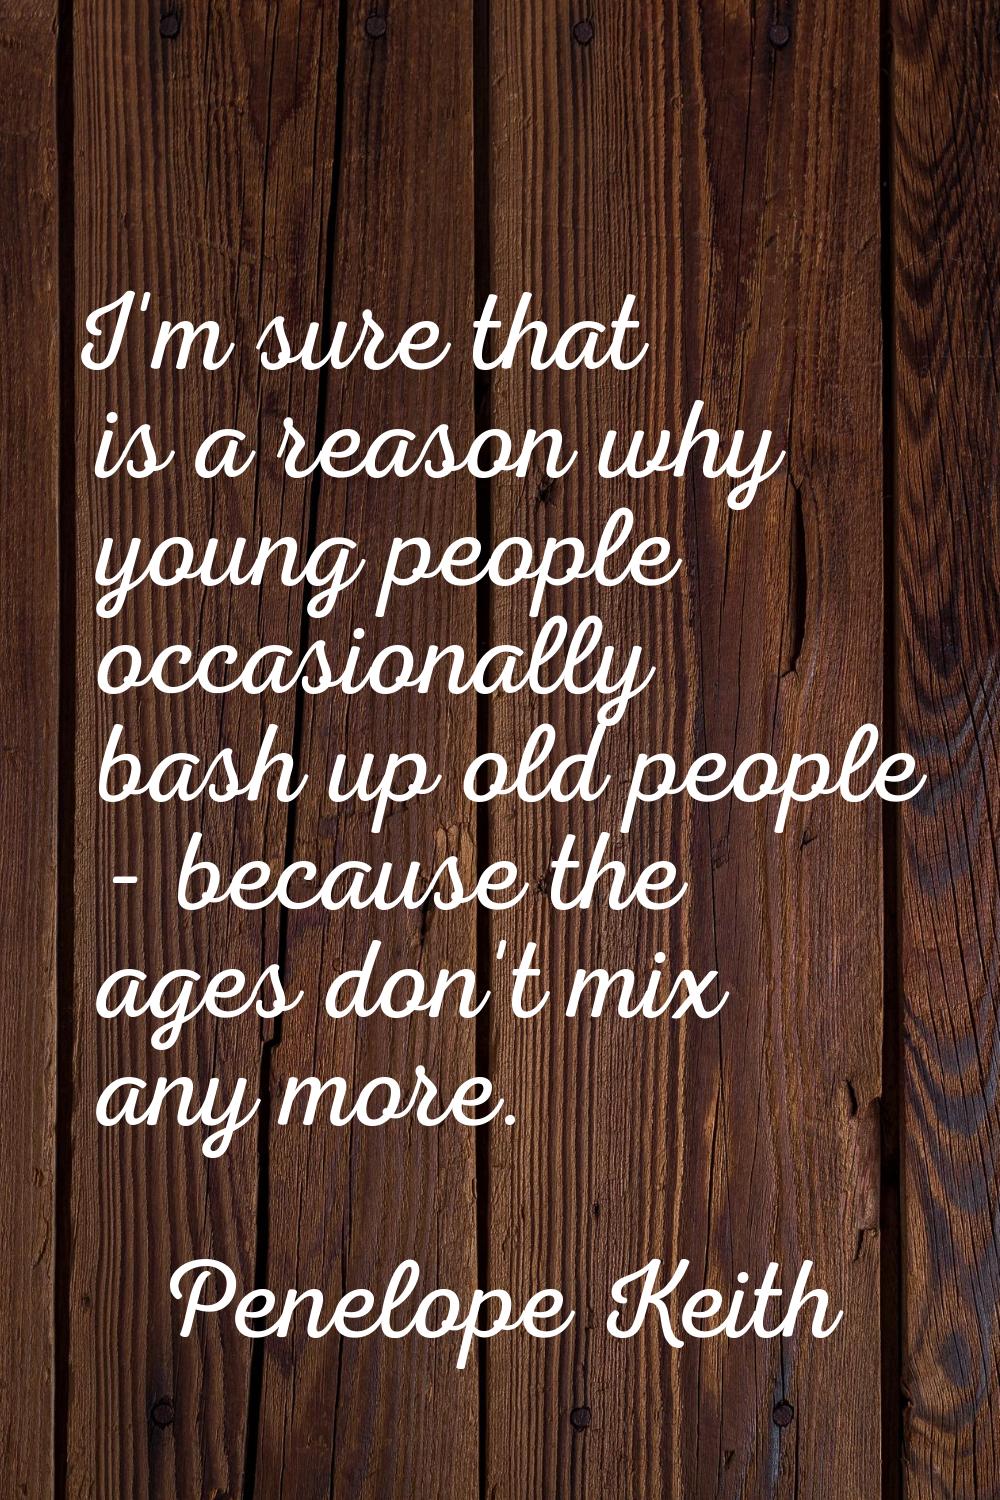 I'm sure that is a reason why young people occasionally bash up old people - because the ages don't